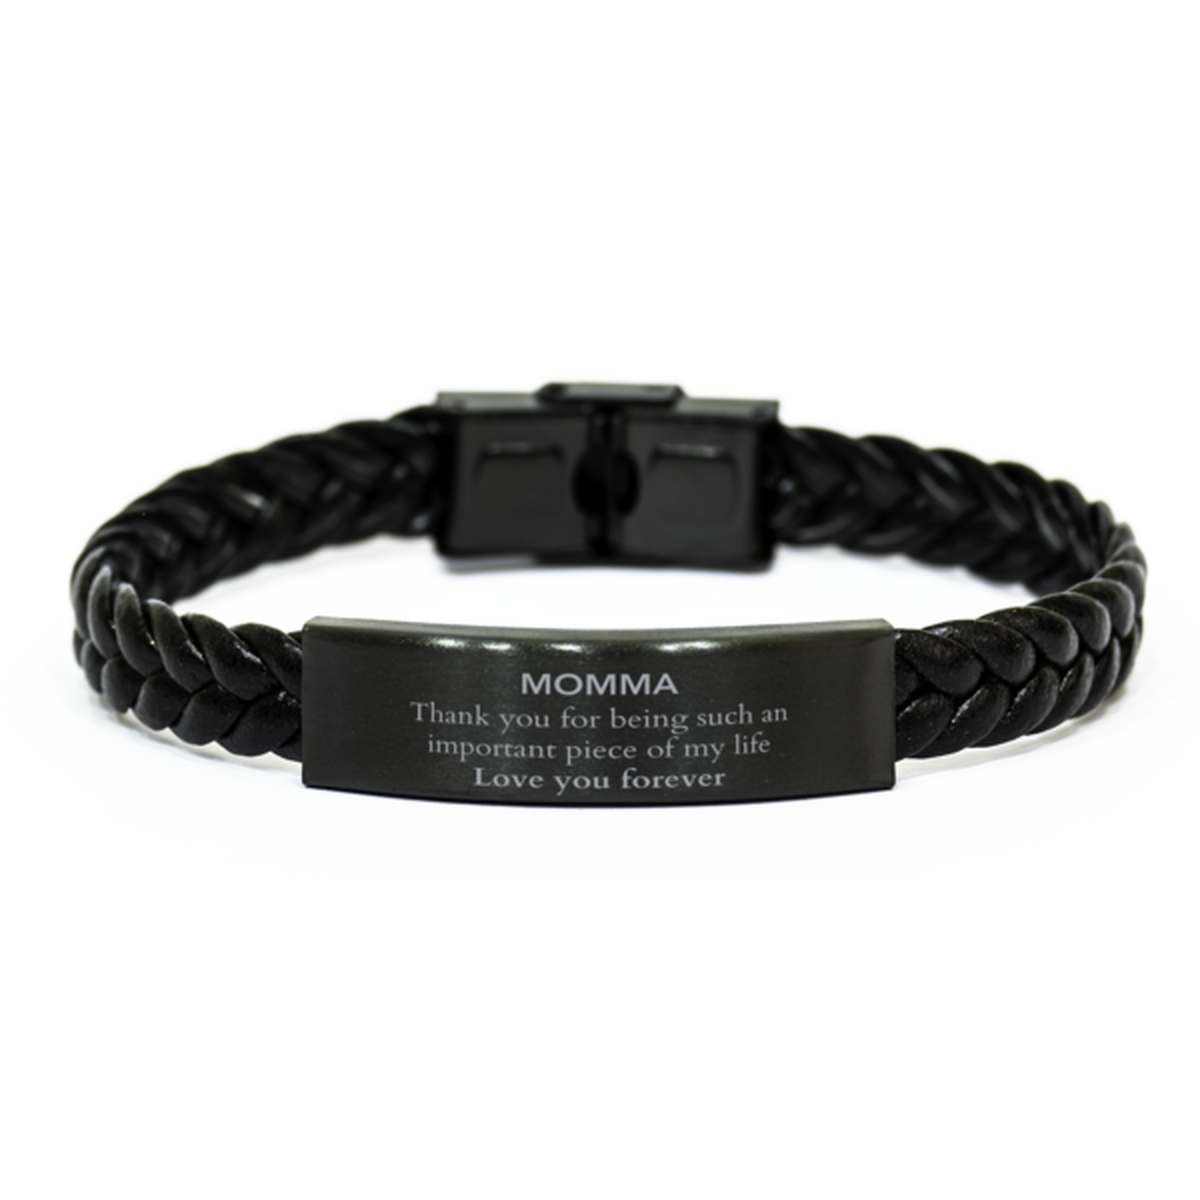 Appropriate Momma Braided Leather Bracelet Epic Birthday Gifts for Momma Thank you for being such an important piece of my life Momma Christmas Mothers Fathers Day